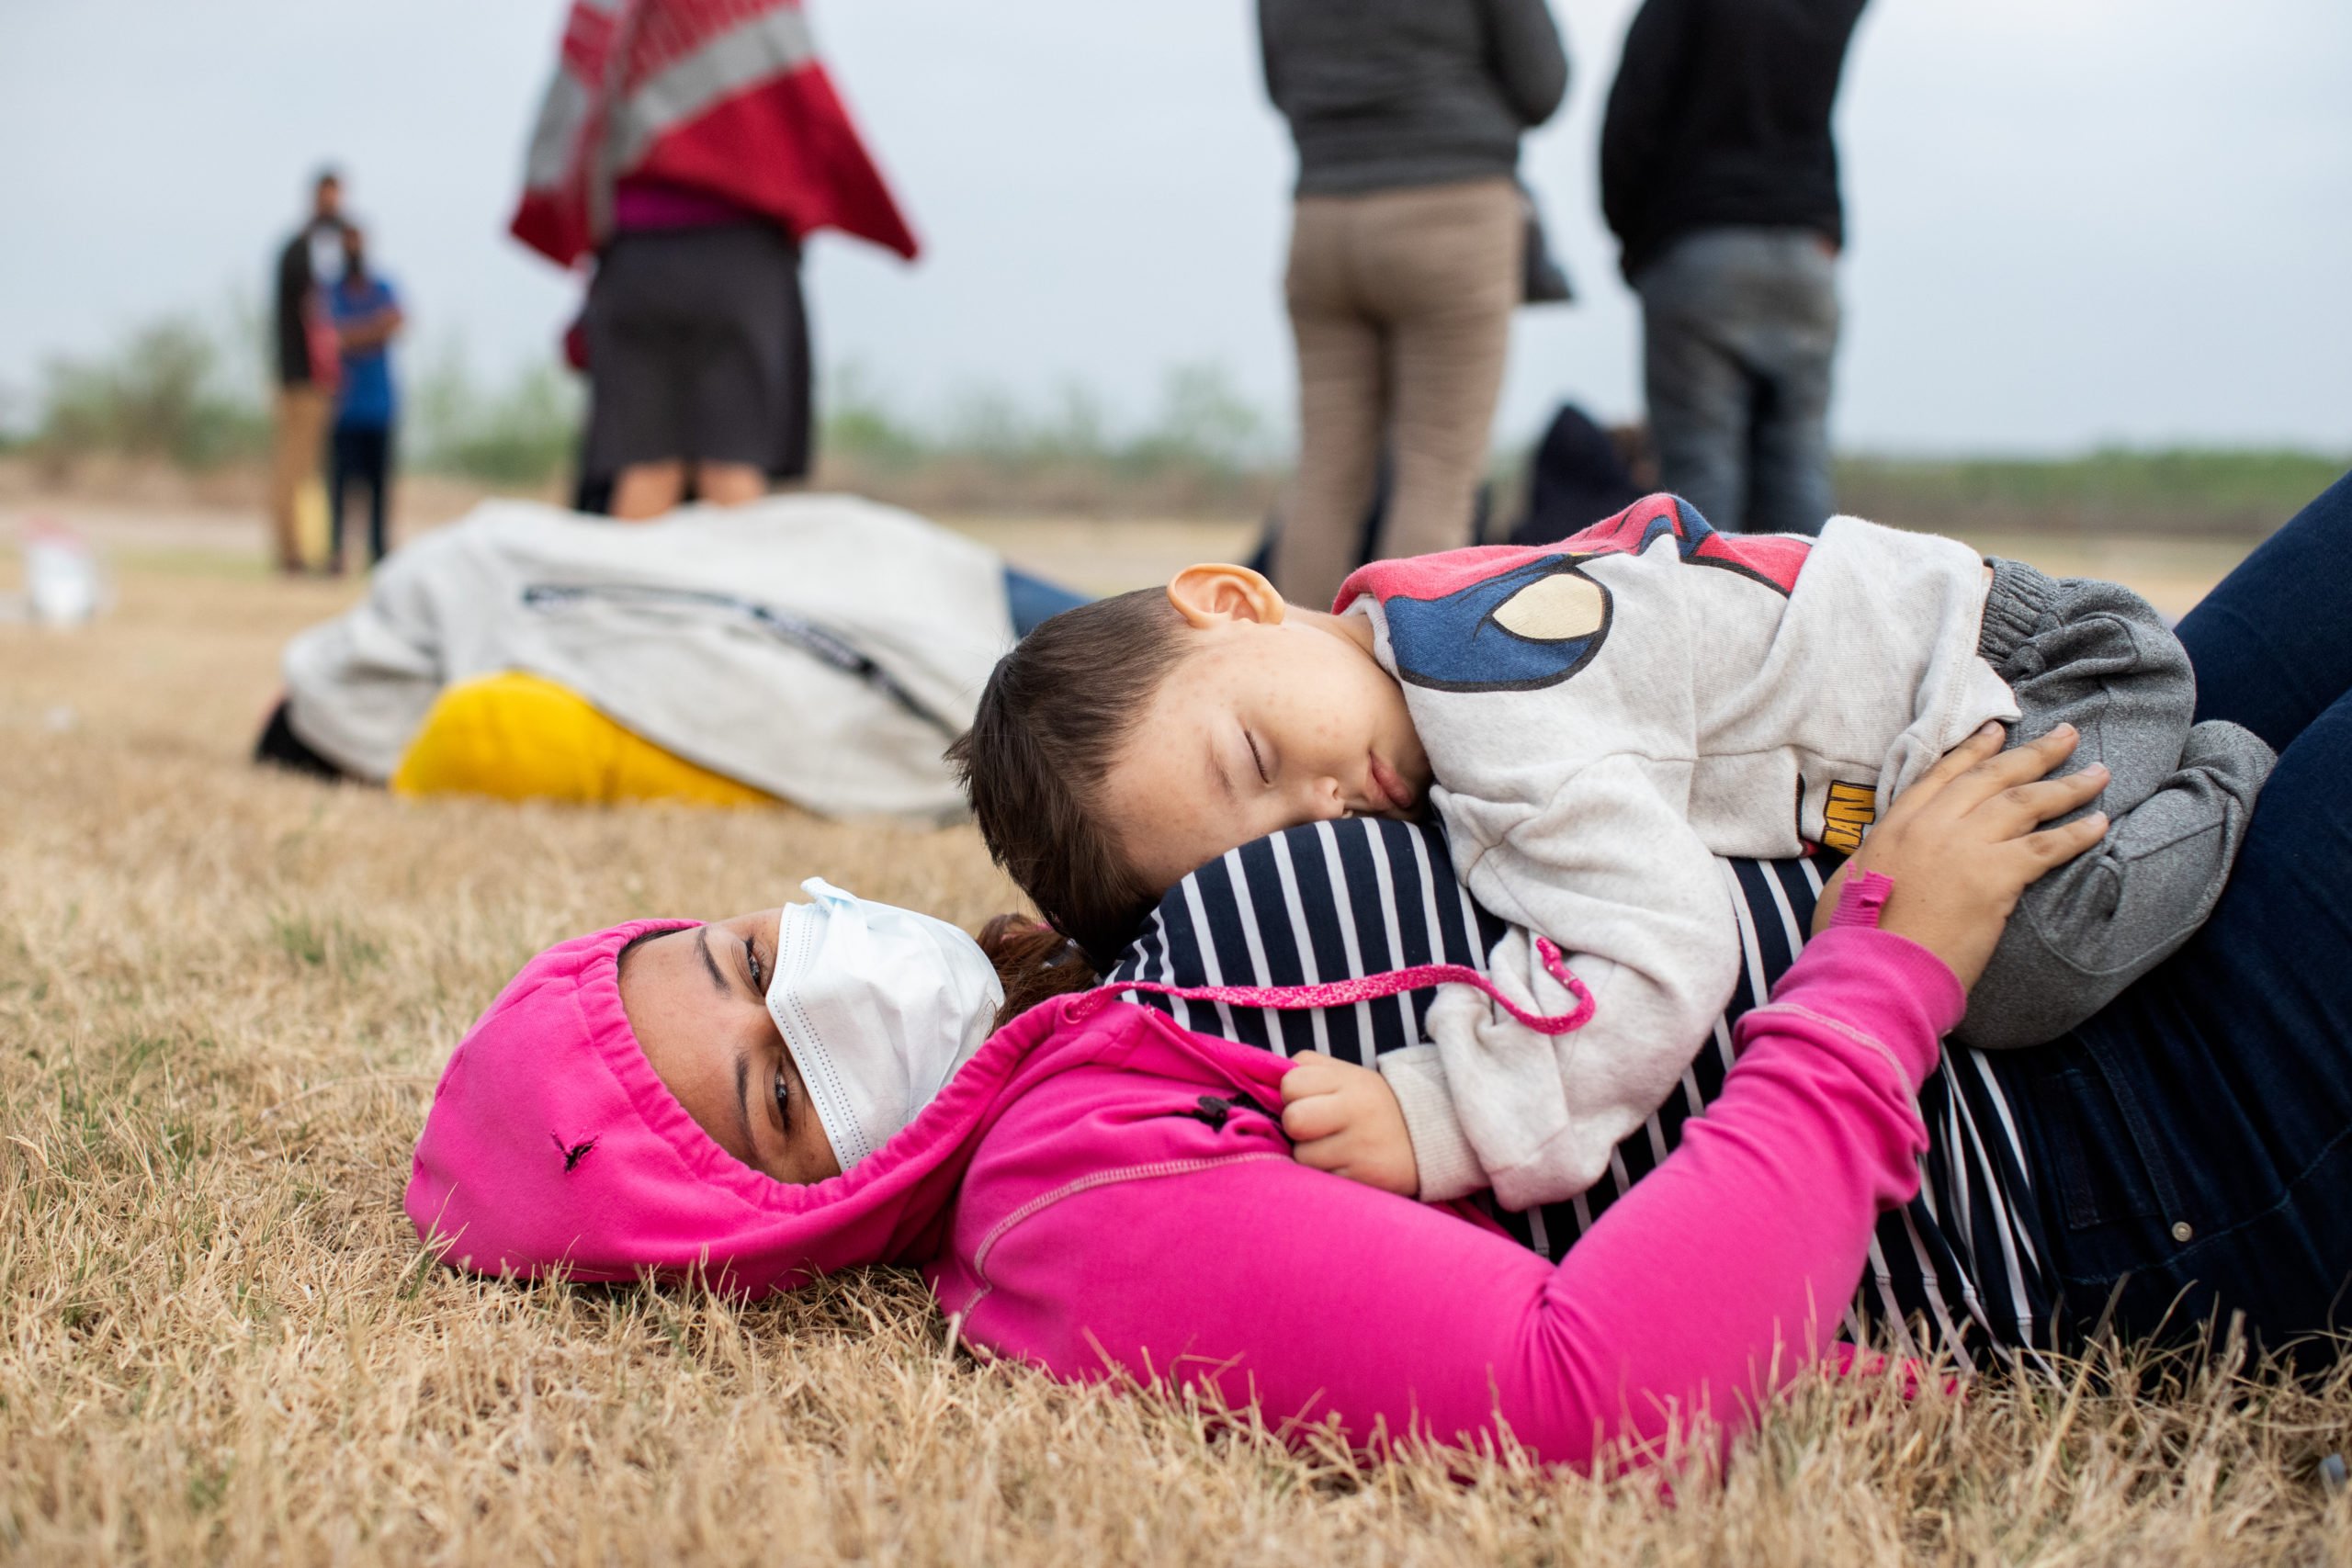 Illegal migrants wait on the side of a public road to be processed and taken to Customs and Border Protection facilities in La Joya, Texas on March 27, 2021. (Kaylee Greenlee - Daily Caller News Foundation)